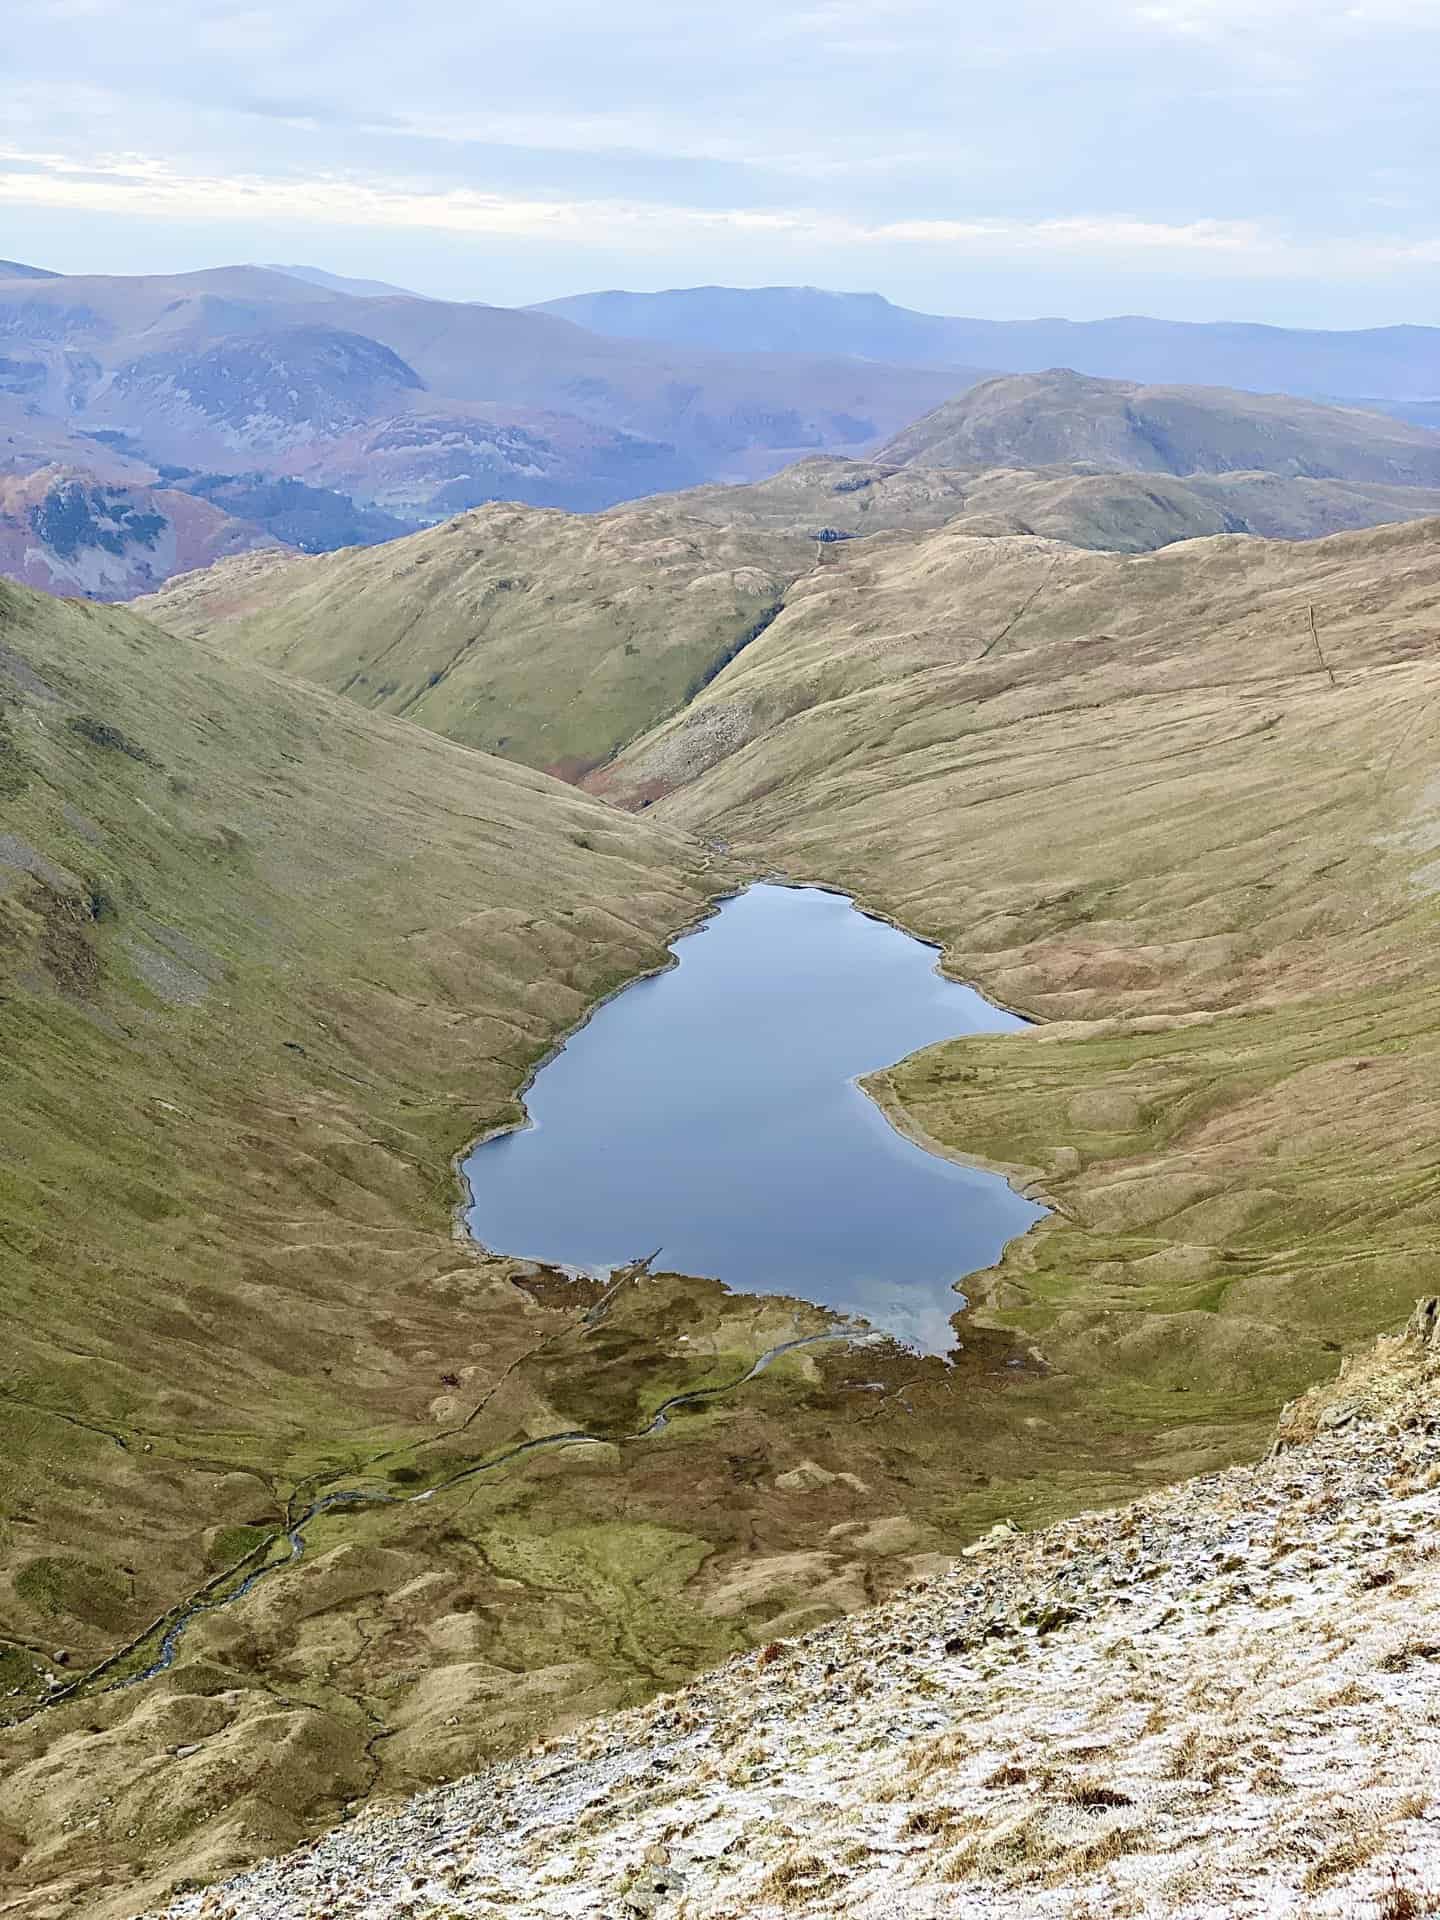 Hayeswater as seen from Racecourse Hill, just below the summit of High Street, height 828 metres (2717 feet), along the Stony Cove Pike trail.